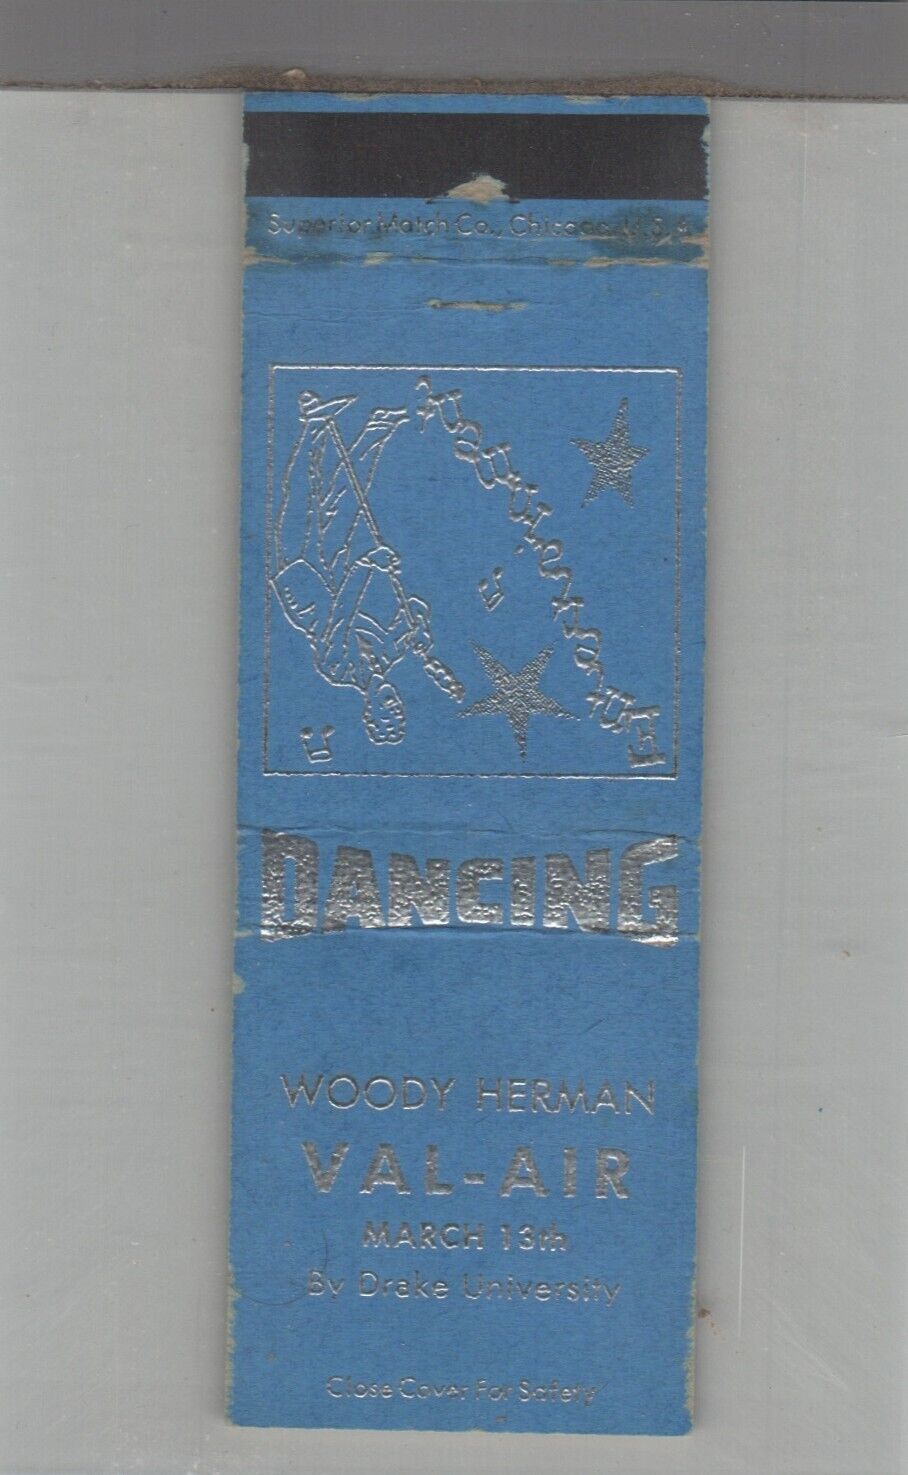 Matchbook Cover Woody Herman Val-Air By Drake University